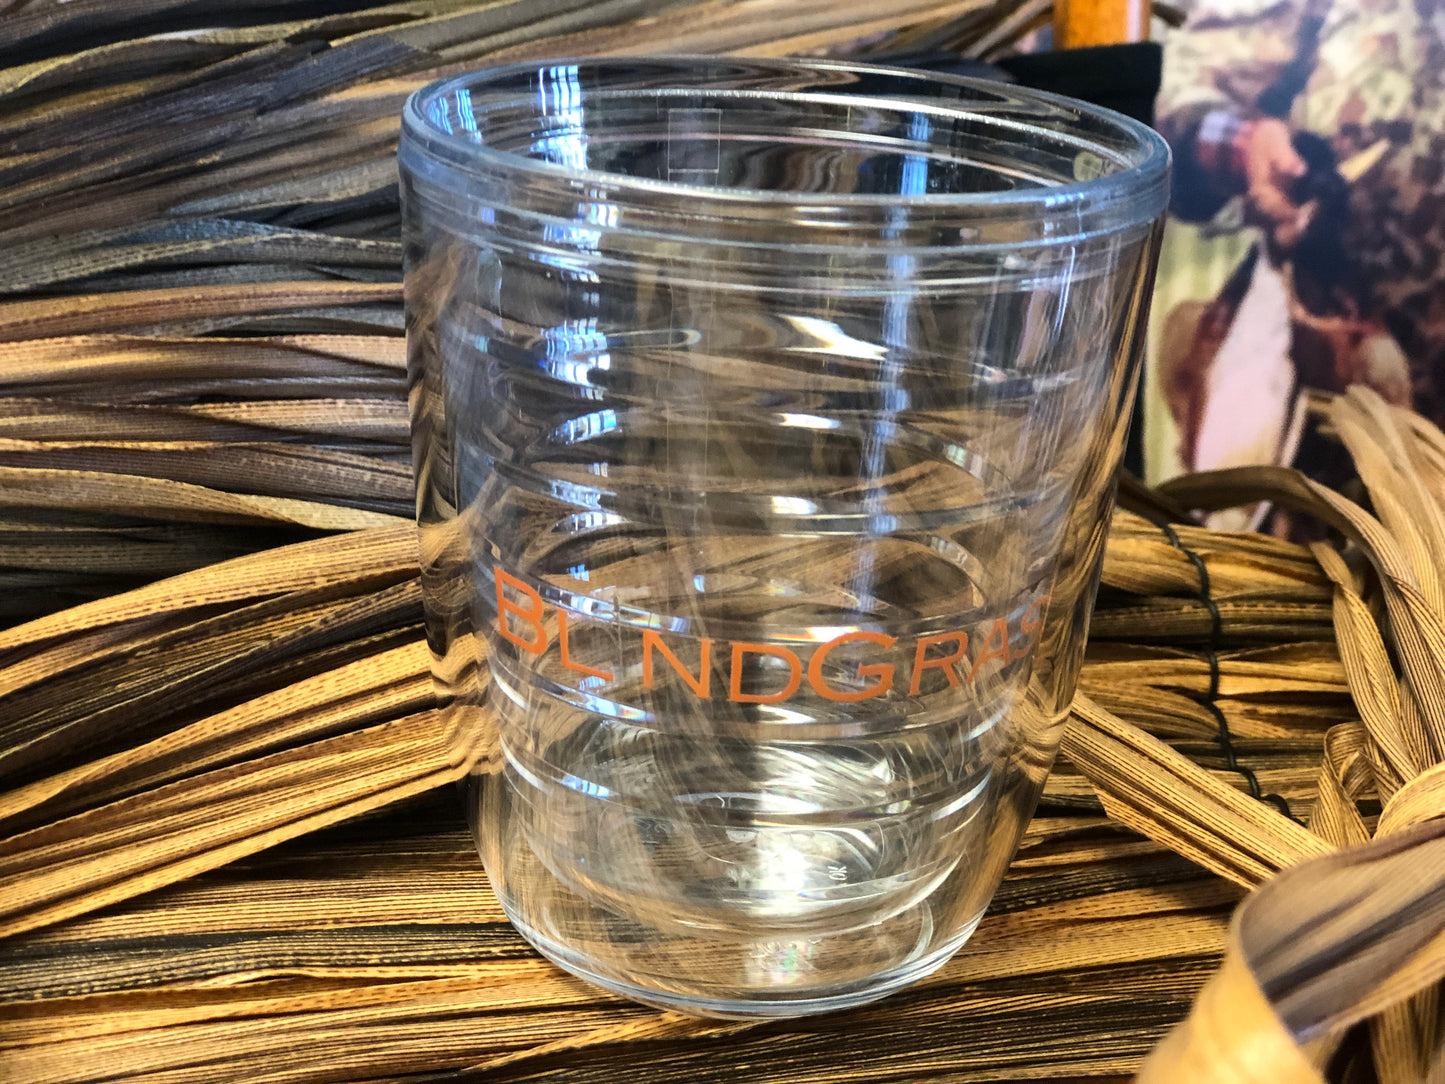 Logo 12 oz. Double Walled, Clear Plastic Tumbler.